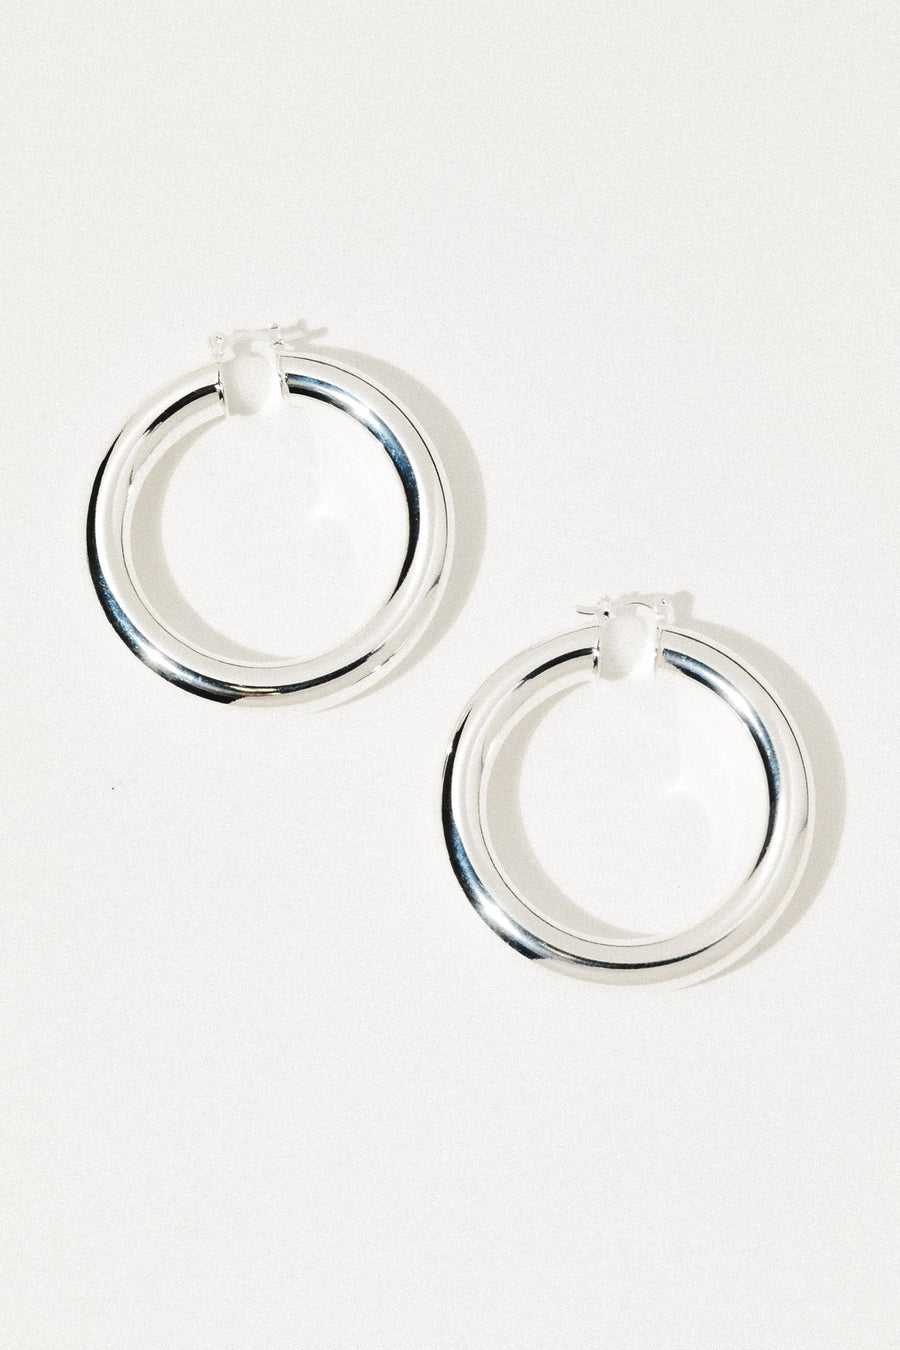 Dona Italia Jewelry Silver / LARGE Large Aubree Tube Hoops.:.Silver